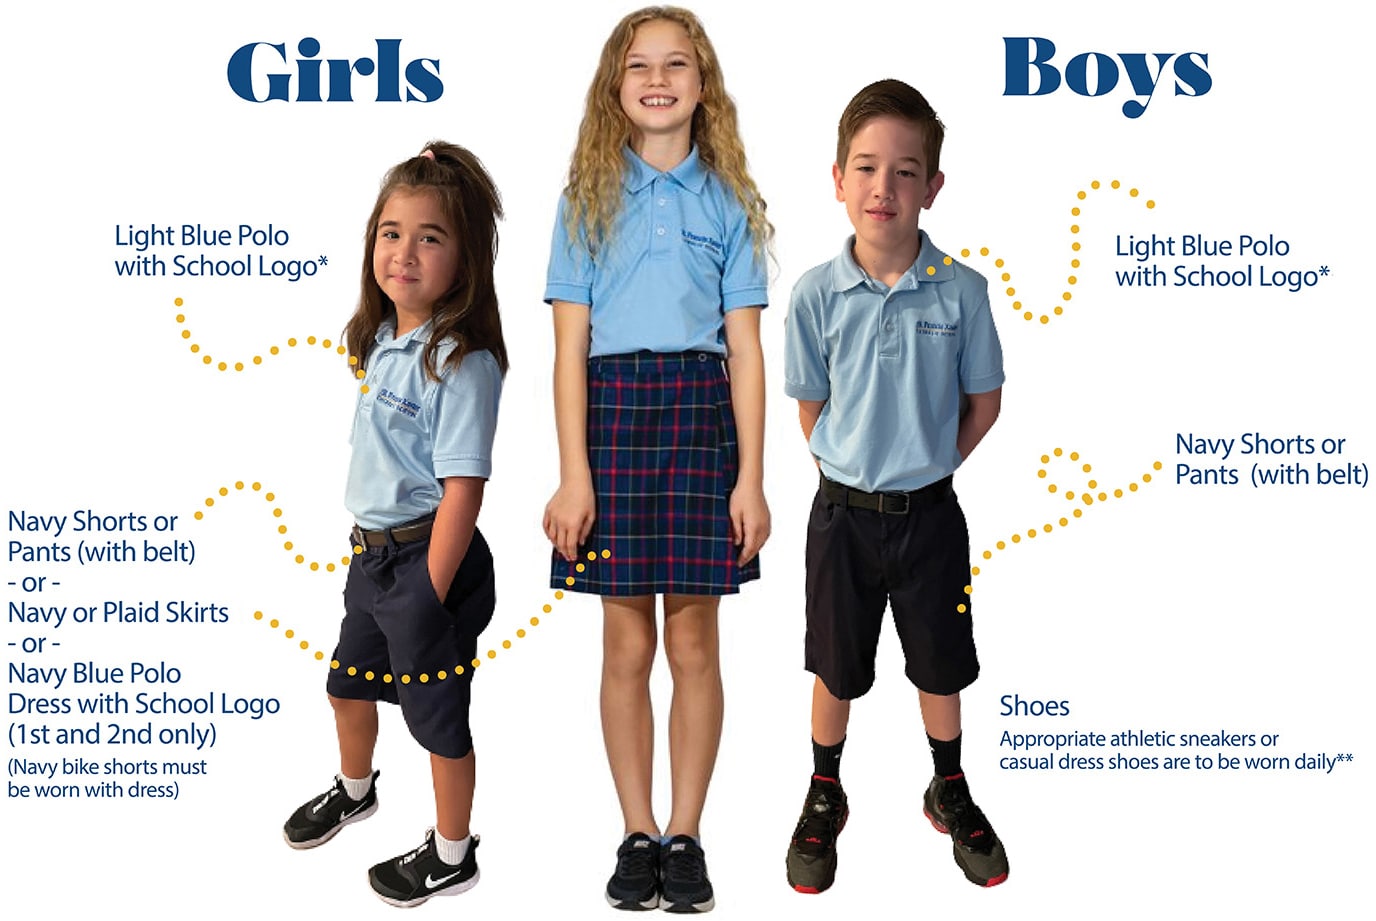 Girls - light blue polo with school logo. Navy shorts or pants (with belt), or navy or plaid skirts, or navy blue polo dress with school logo (1st and 2nd only). Navy bike shorts must be worn with dress. Boys - Light Blue Polo with School Logo. Navy Shorts or Pants (with belt). Shoes - appropriate athletic sneakers or casual dress shoes are to be worn daily